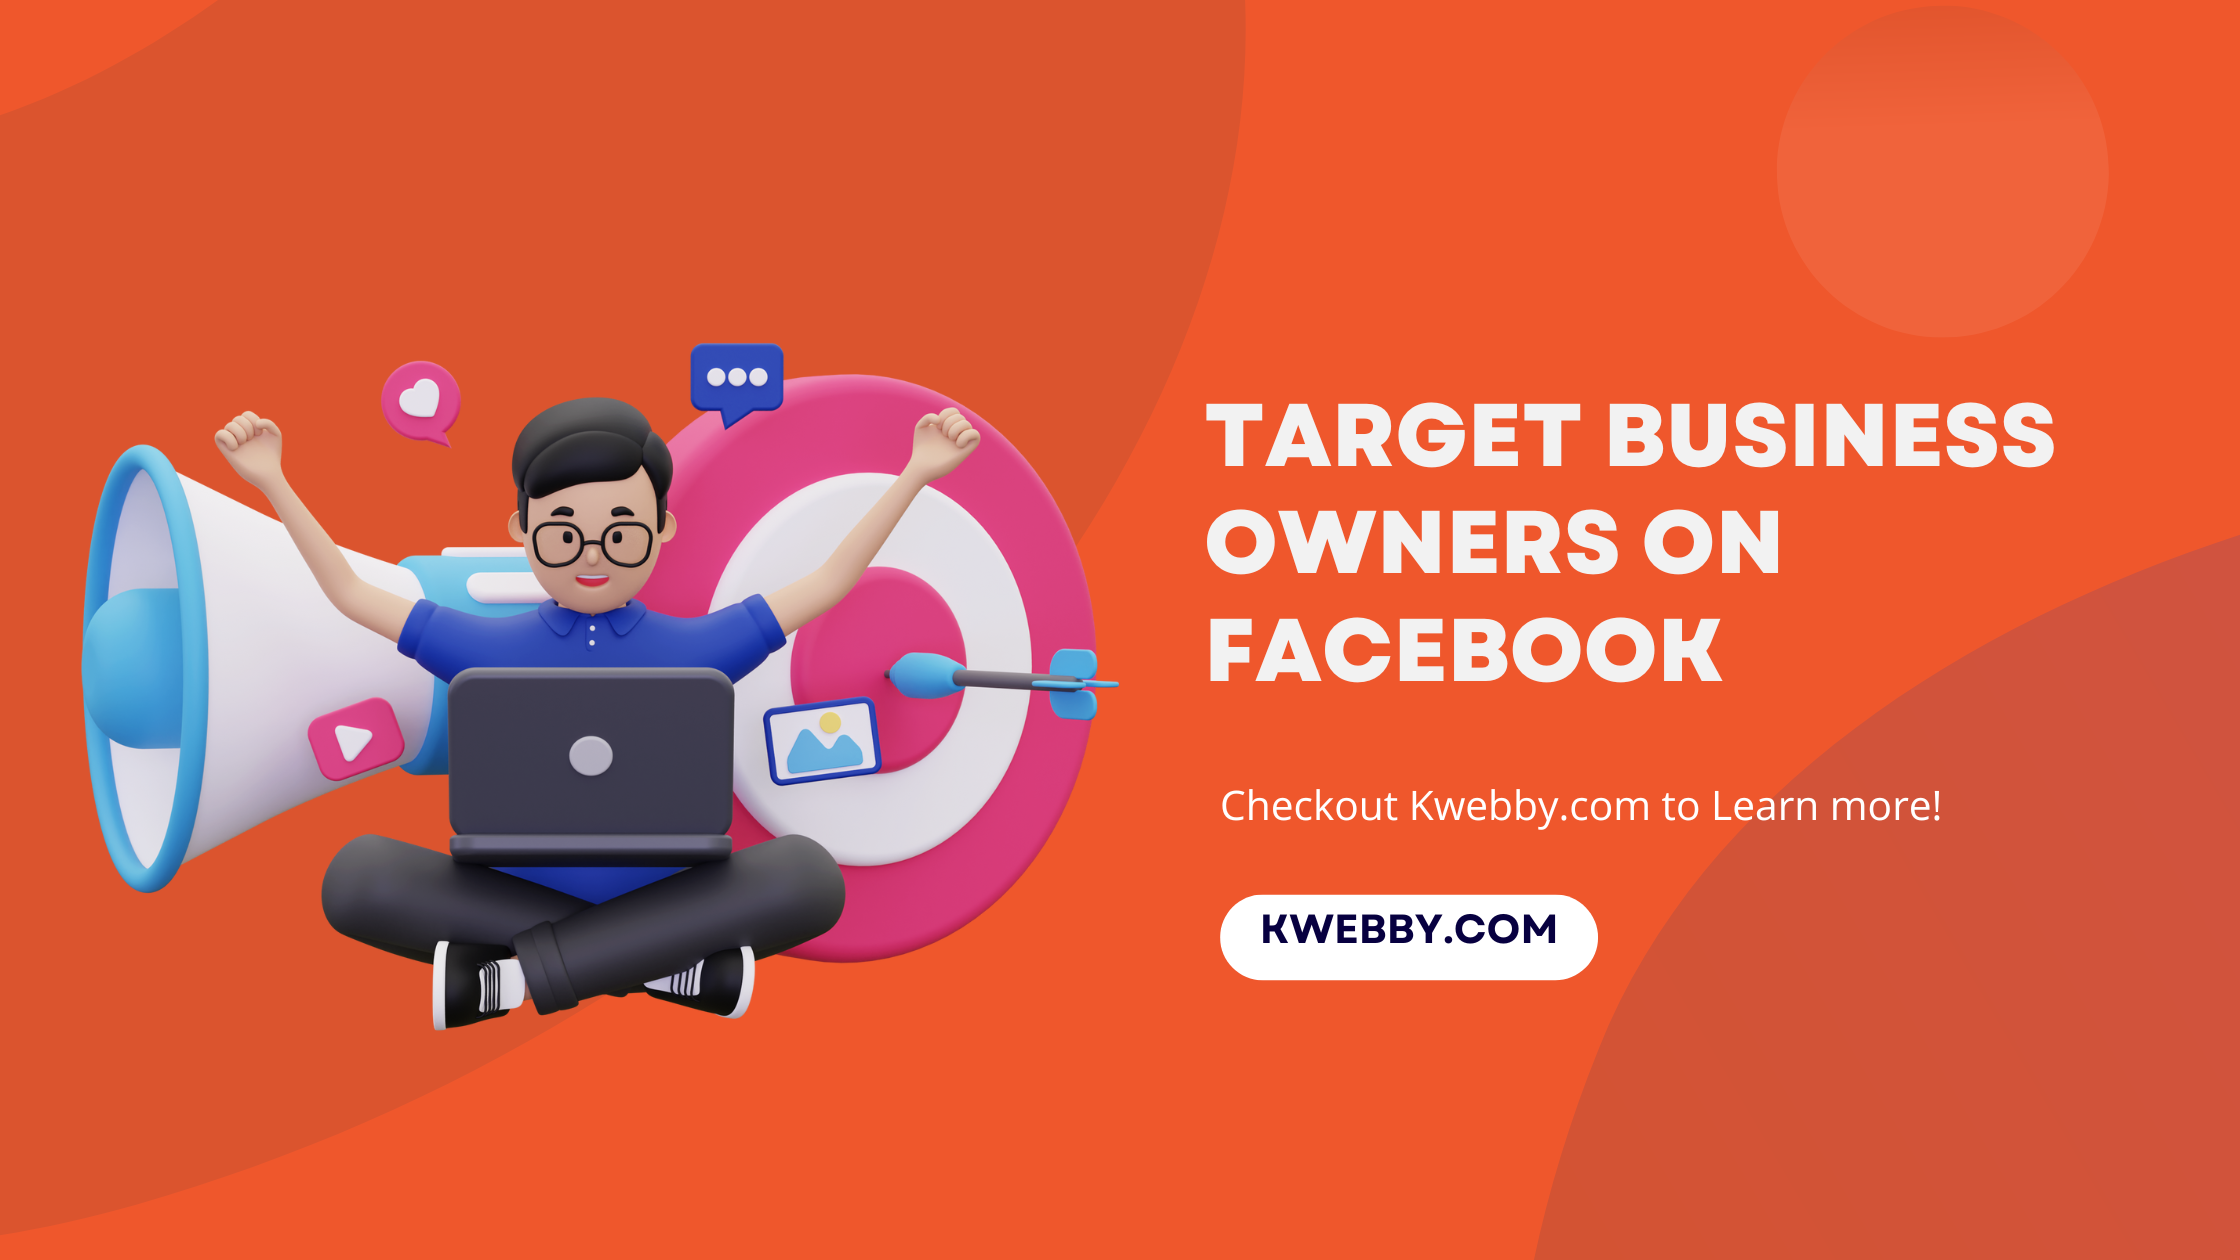 How to target business owners on Facebook